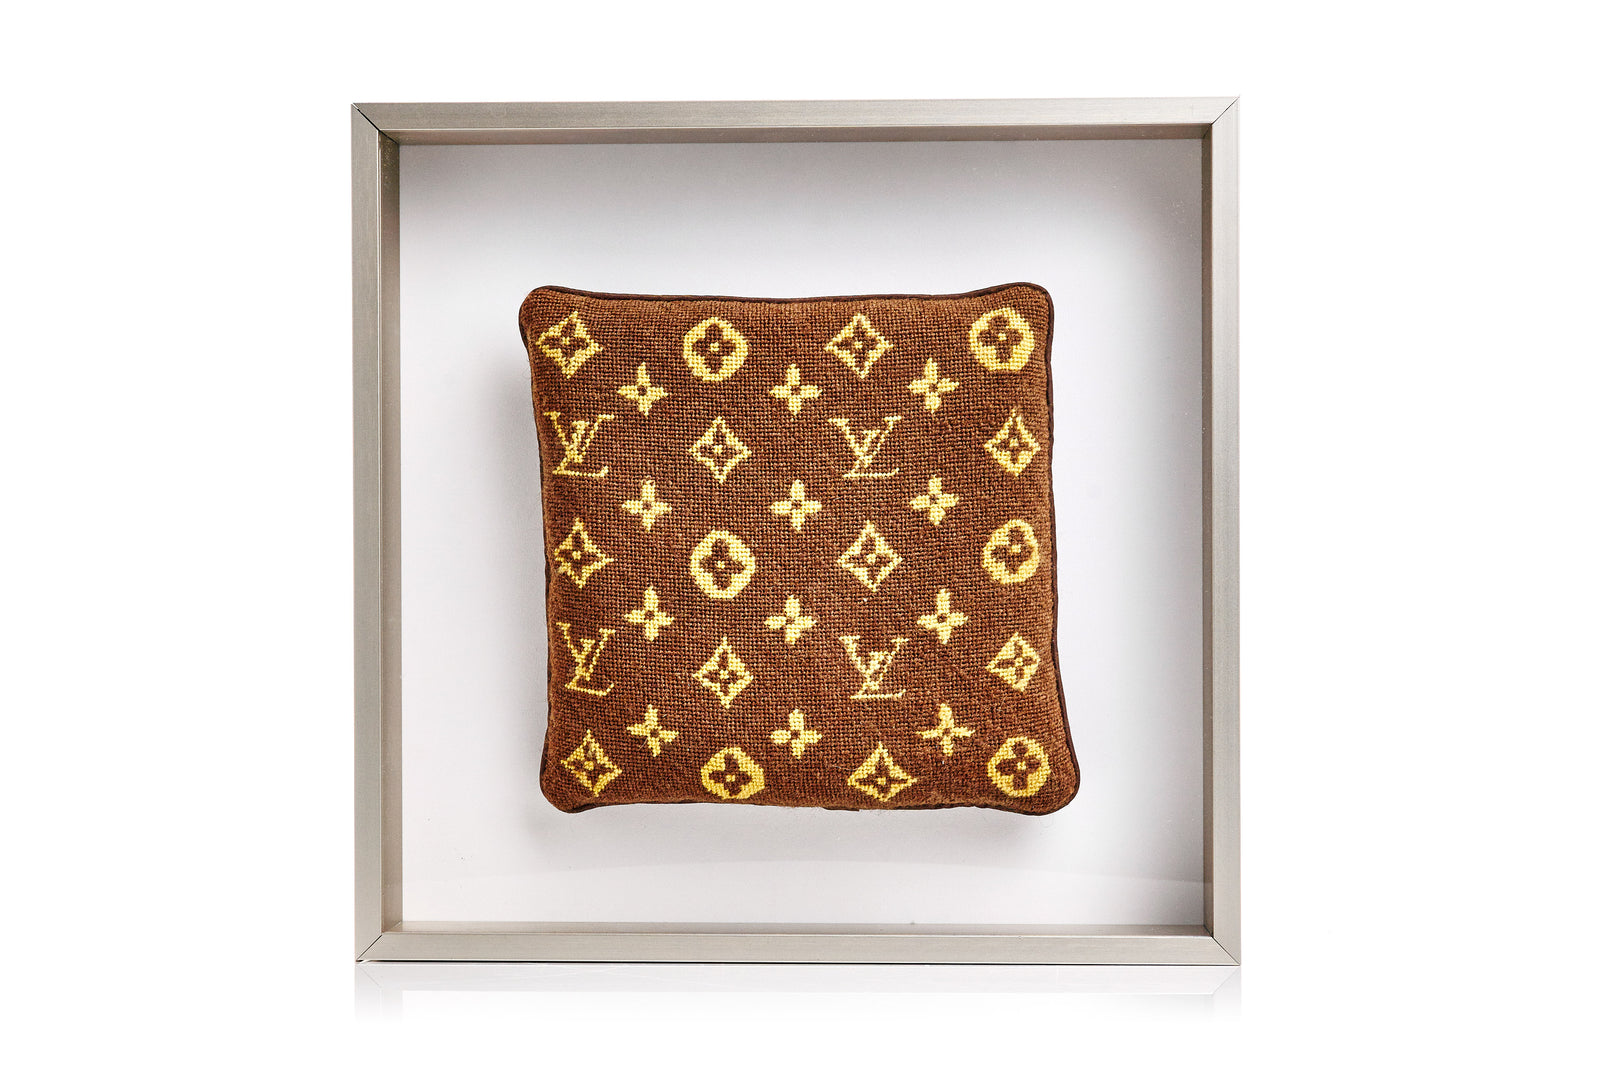 Contemporary Pillow Made From Vintage Louis Vuitton Monogram